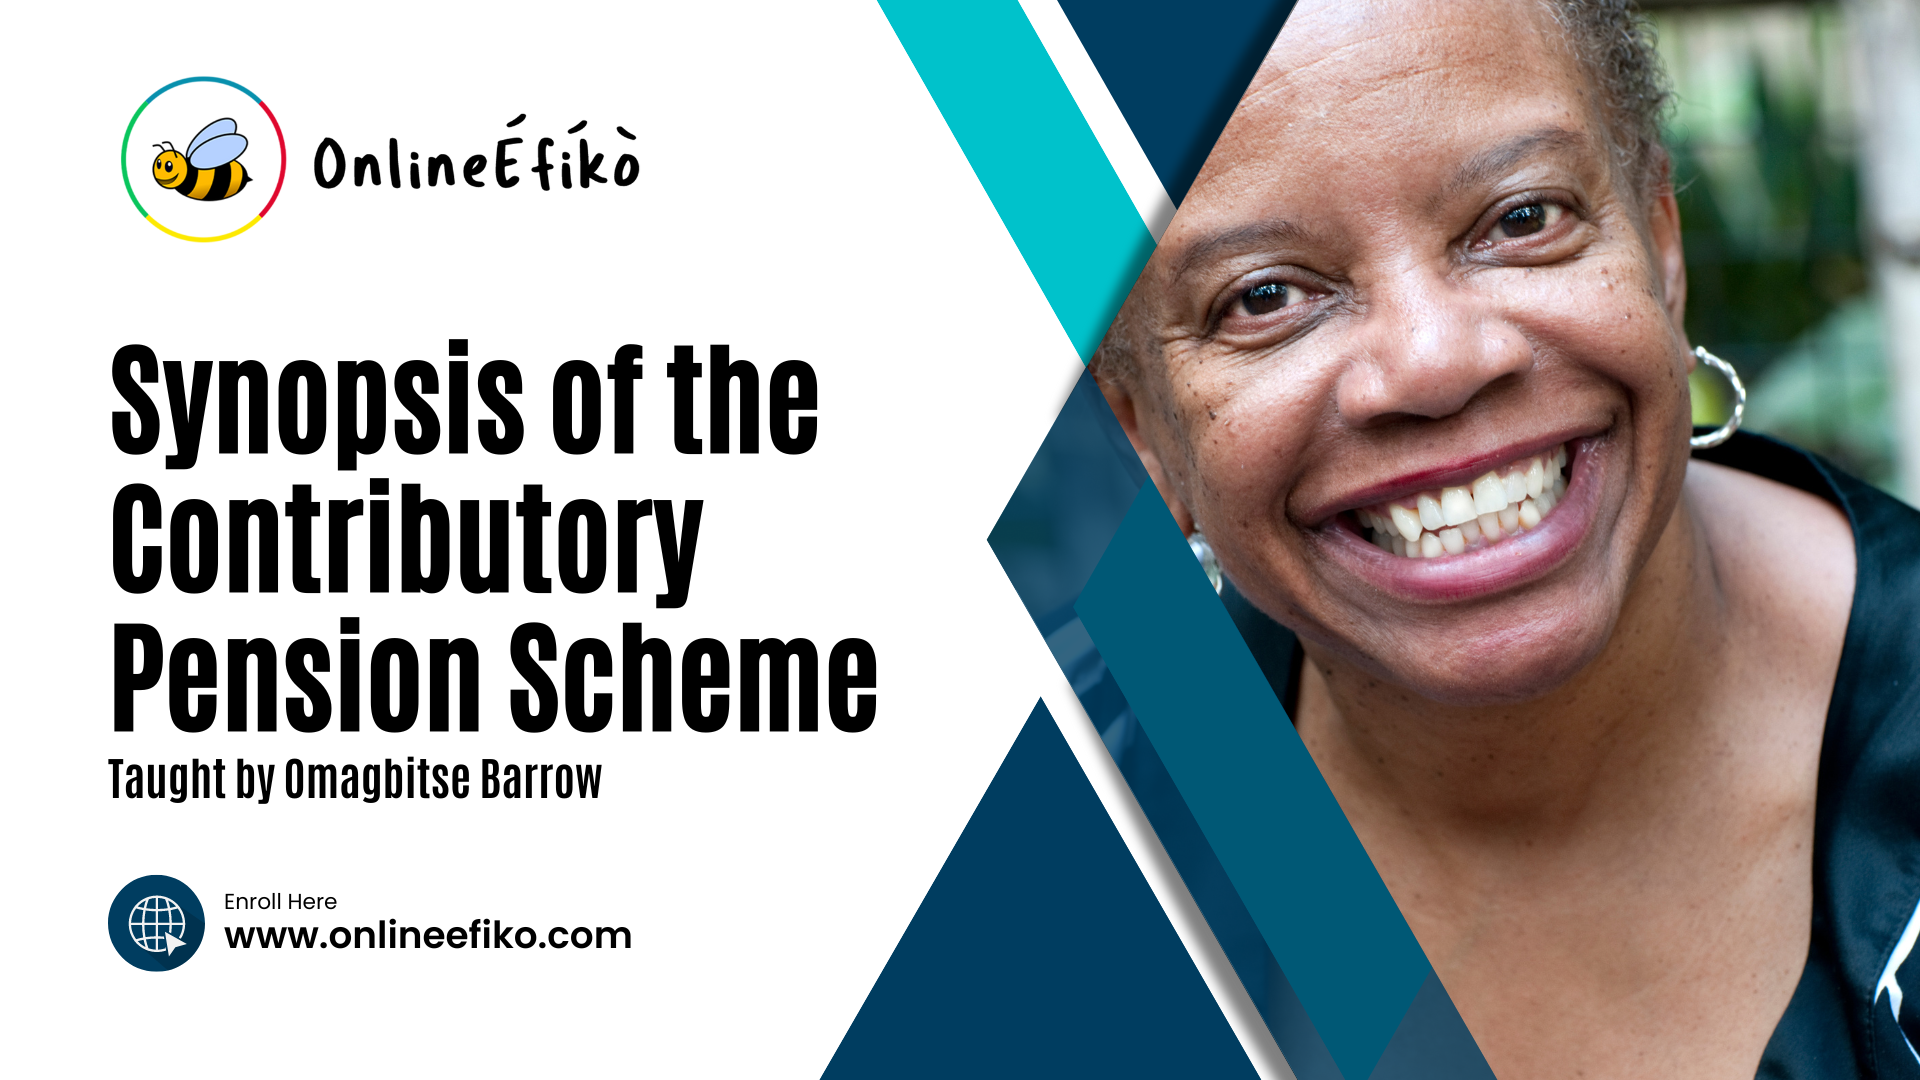 Synopsis of the Contributory Pension Scheme